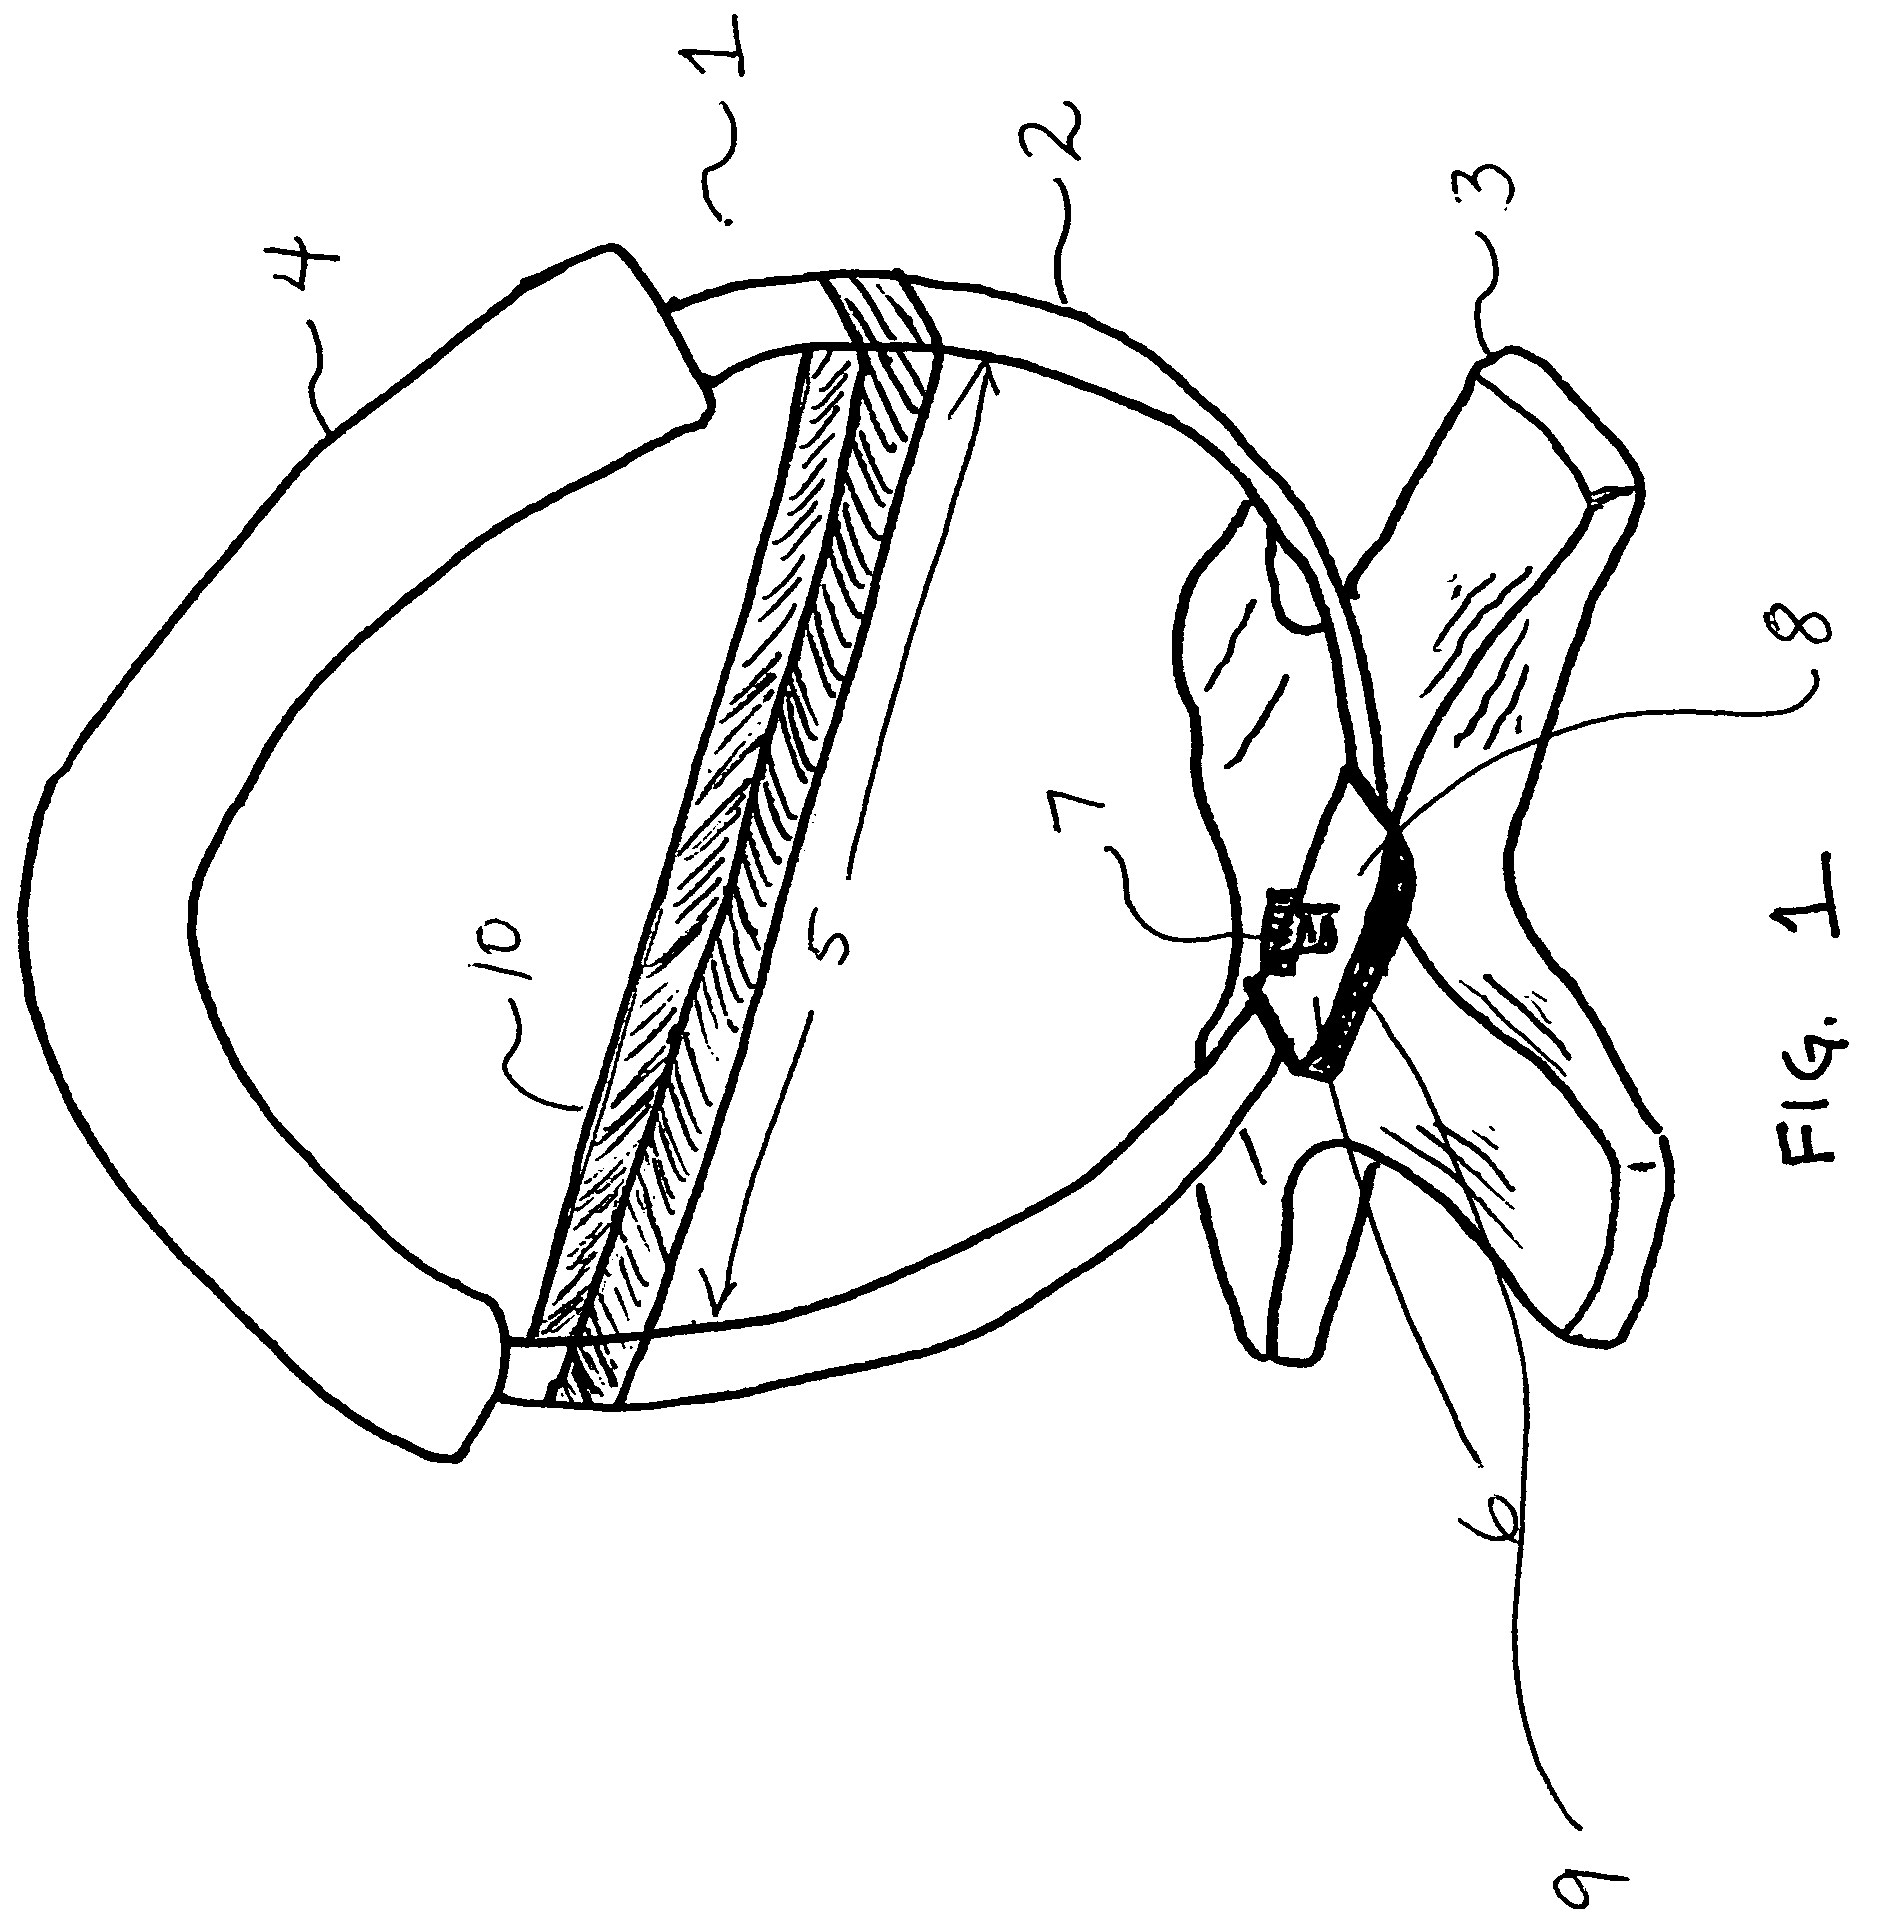 Push up/pull up exercise apparatus and methods for use